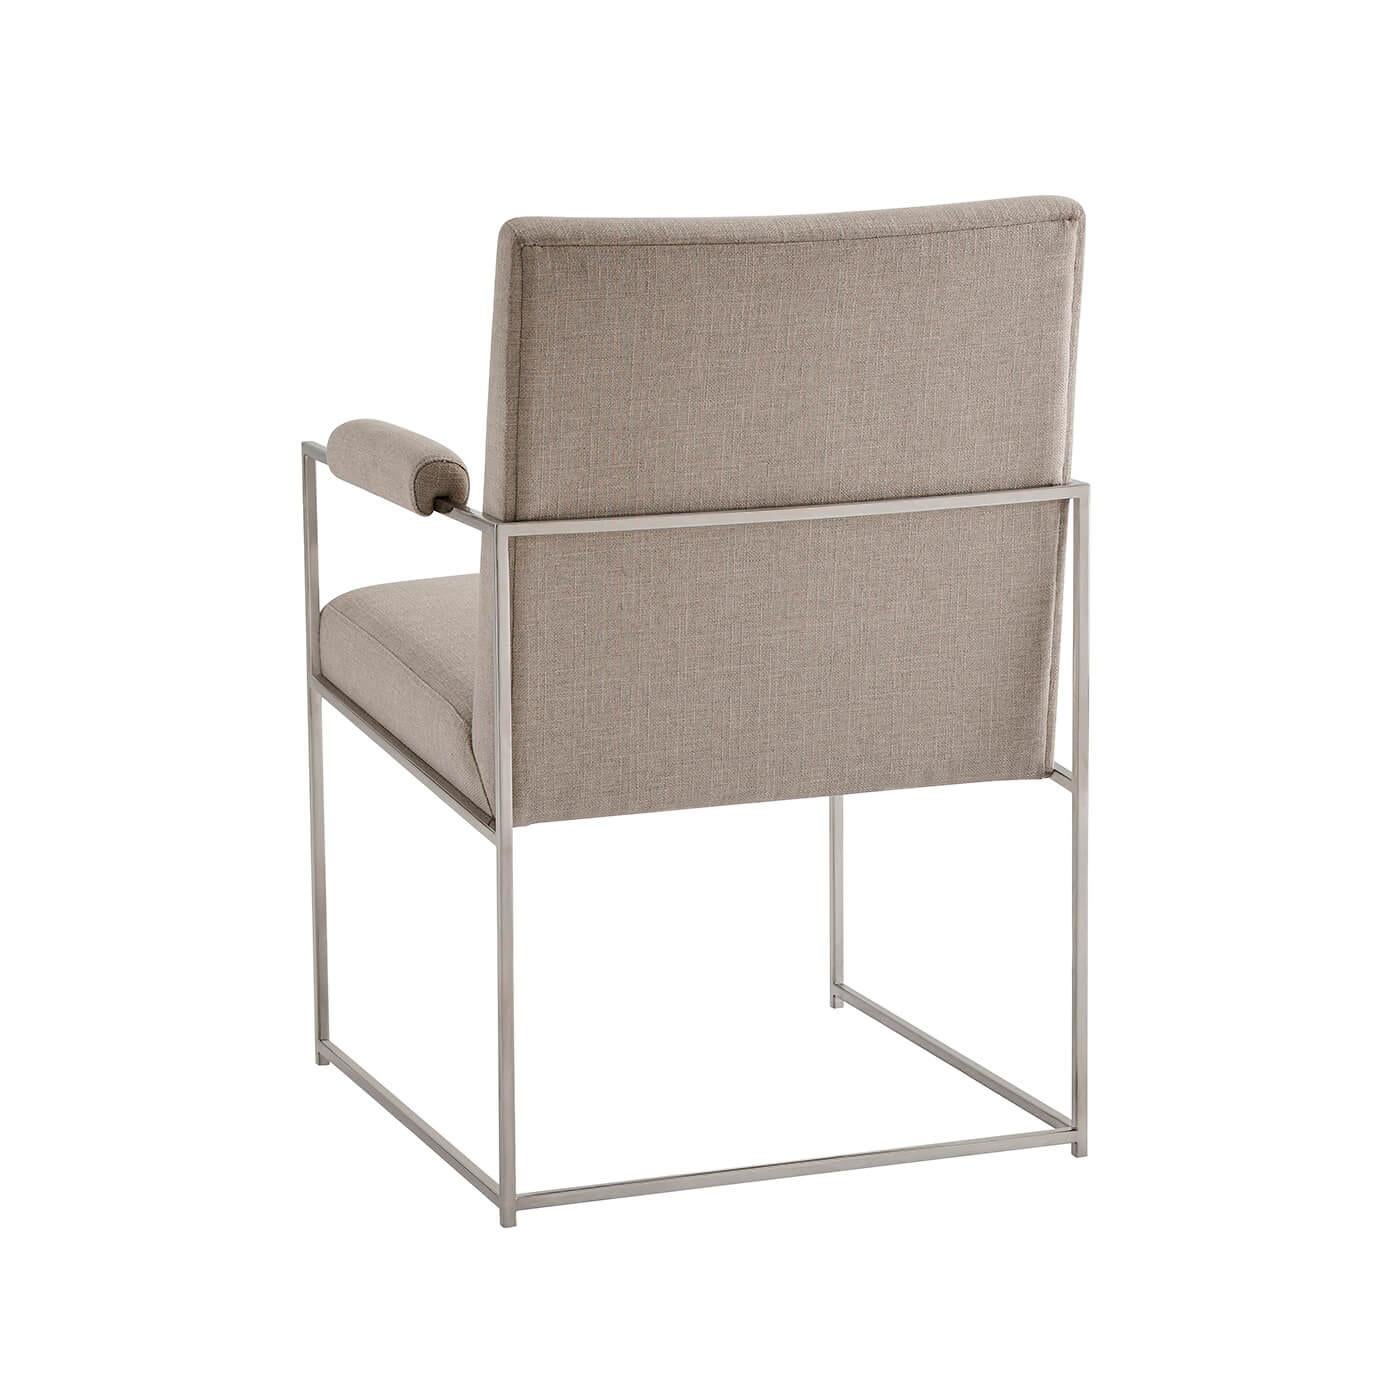 Midcentury steel frame dining armchair with a nickel finish steel frame, boxed upholstered back and seat, with angular polished nickel finish legs, joined by stretchers.

Dimensions: 24.25